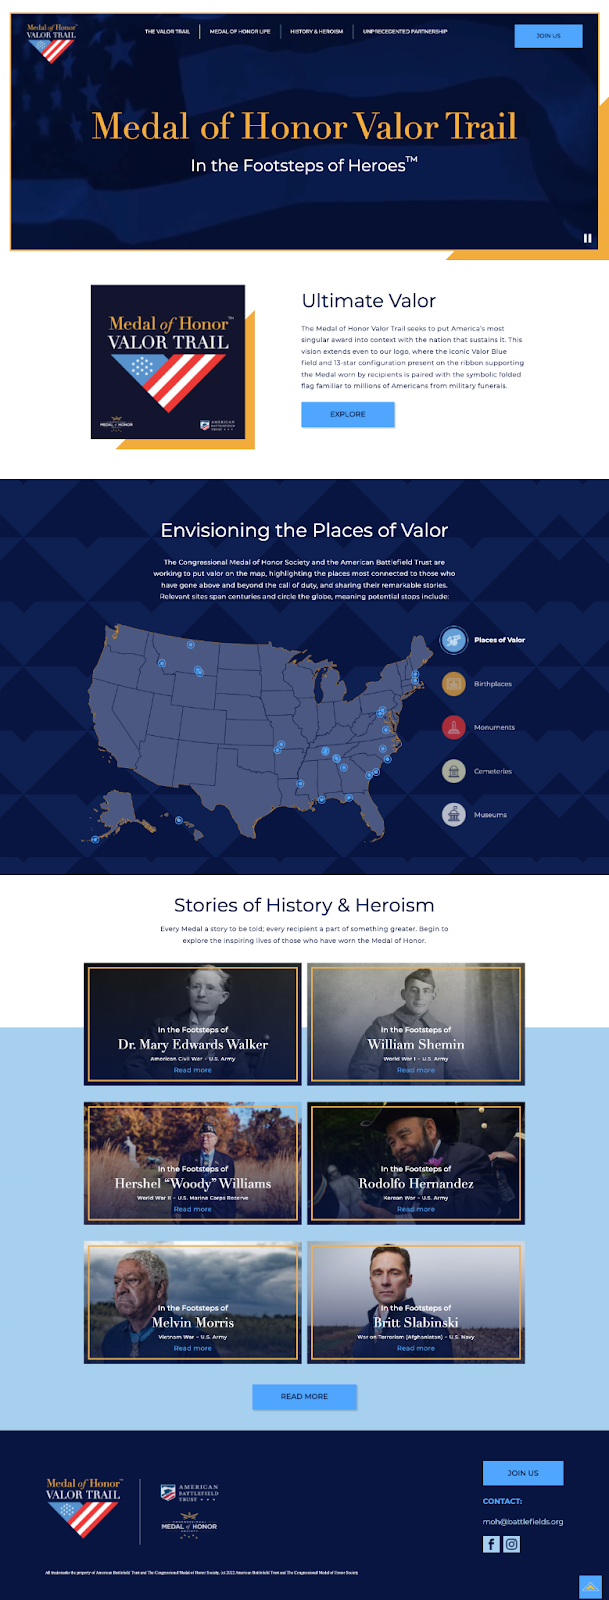 Screenshot of the homepage of the Medal of Honor Valor Trail website